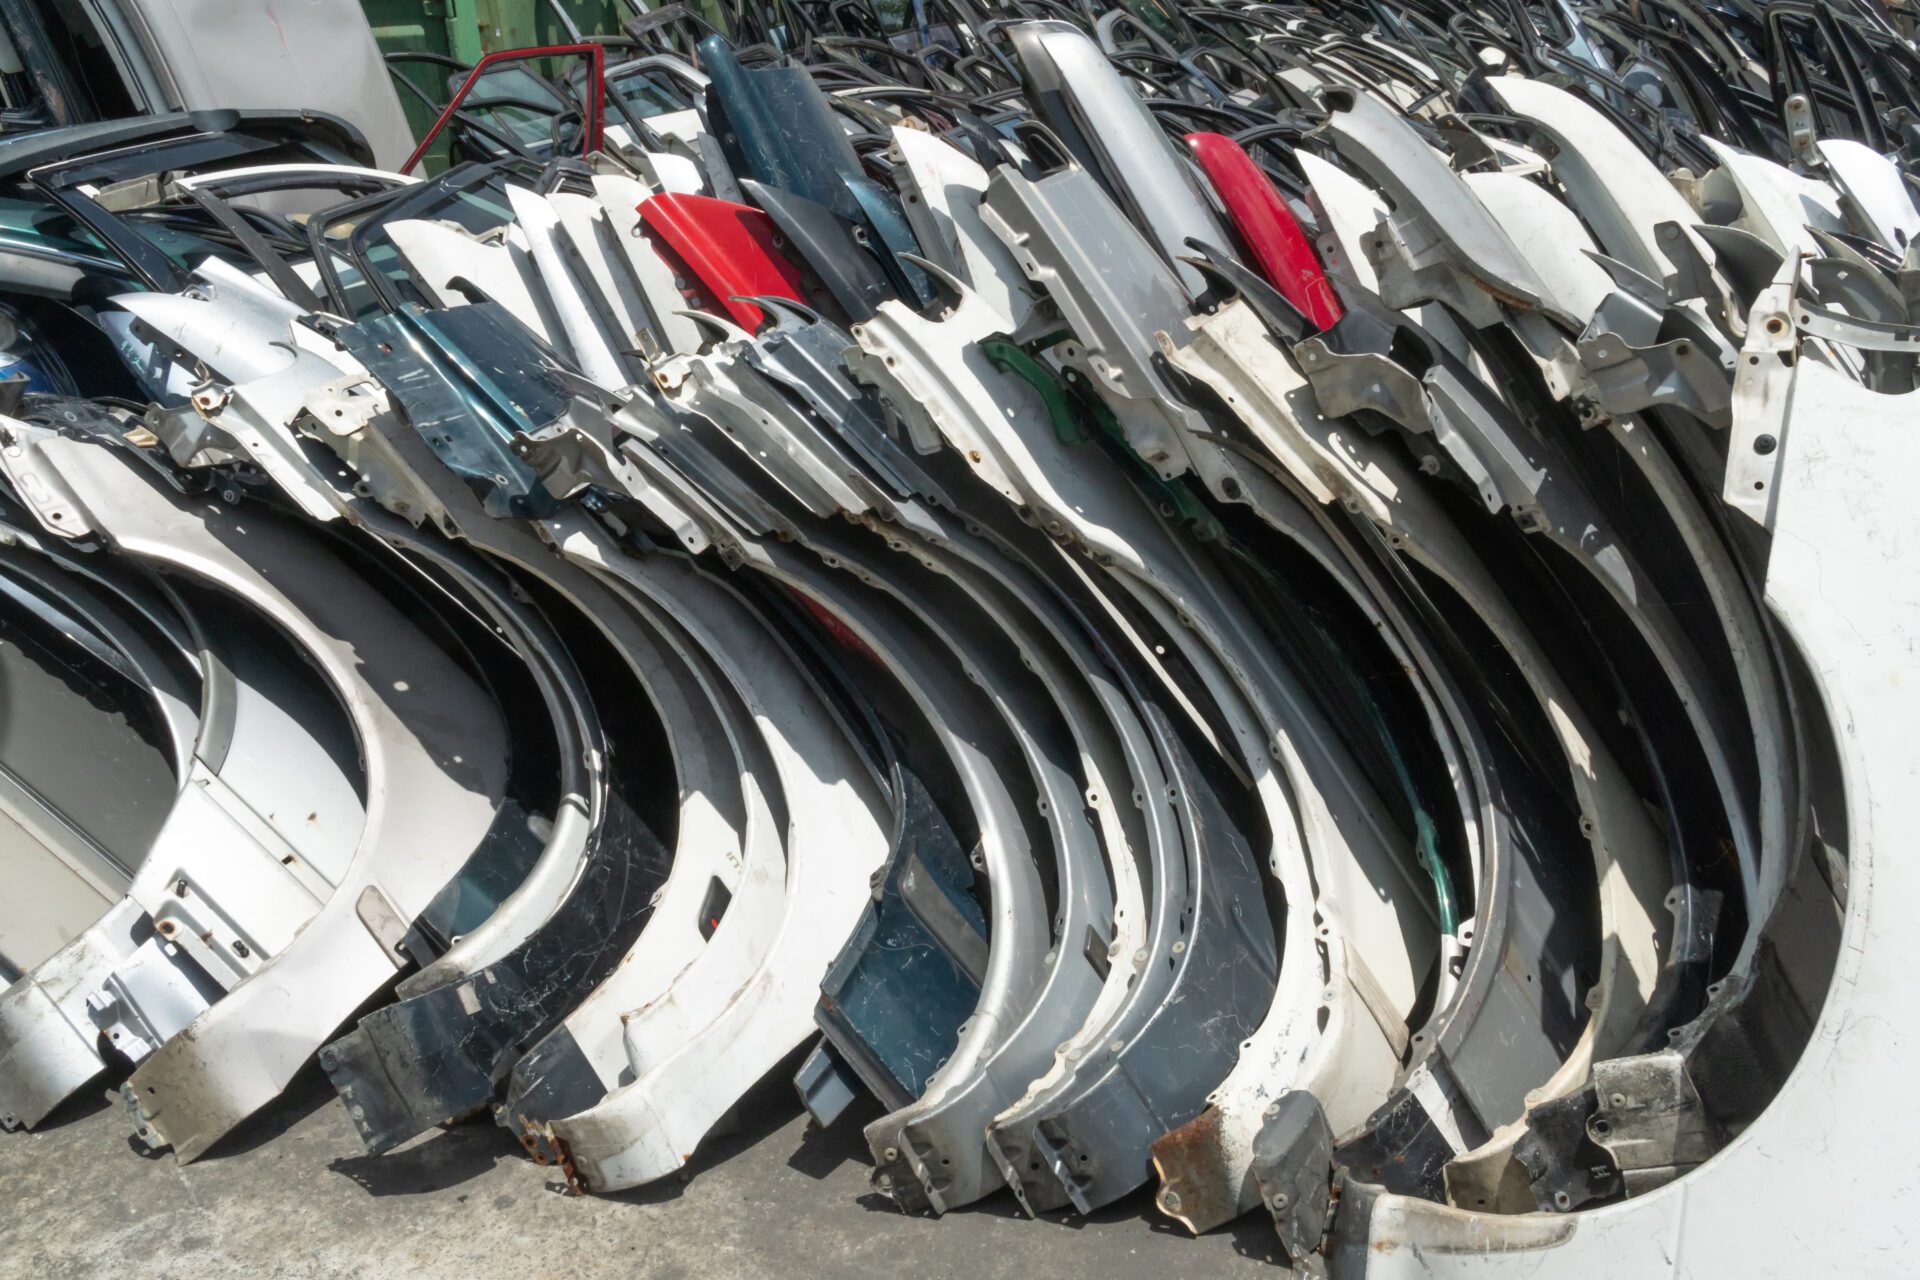 used auto parts for sale and recycling